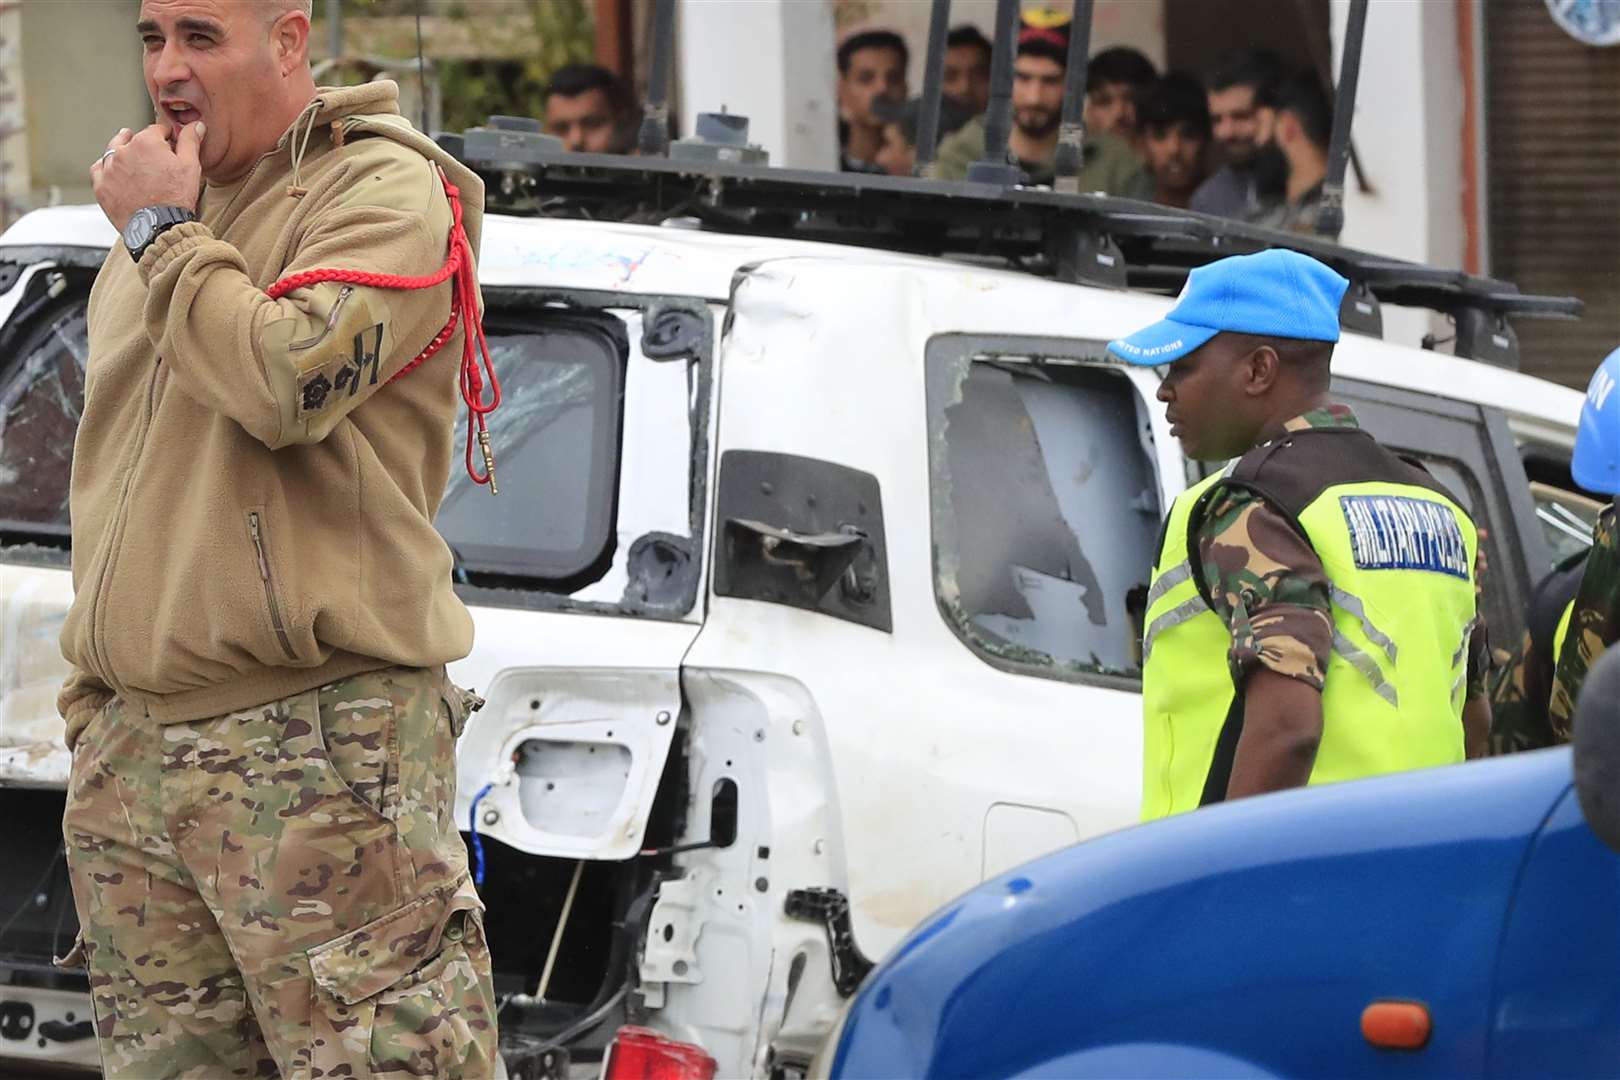 A damaged UN peacekeeper vehicle at the scene of the attack (Mohammed Zaatari/AP)